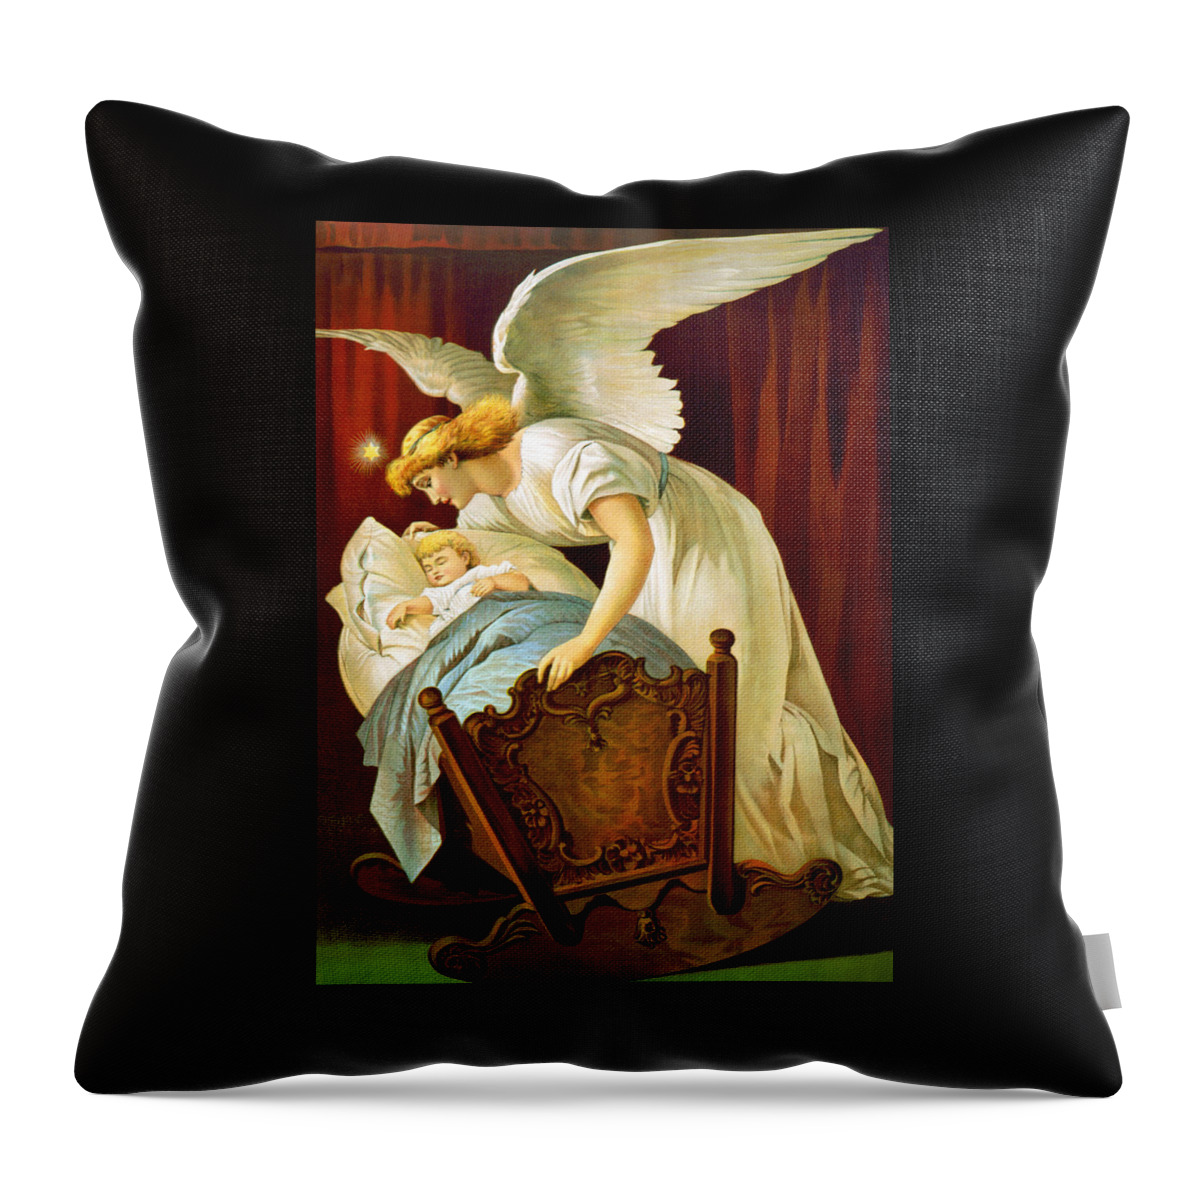 Angel Throw Pillow featuring the photograph Angel and Sleeping Baby by Munir Alawi